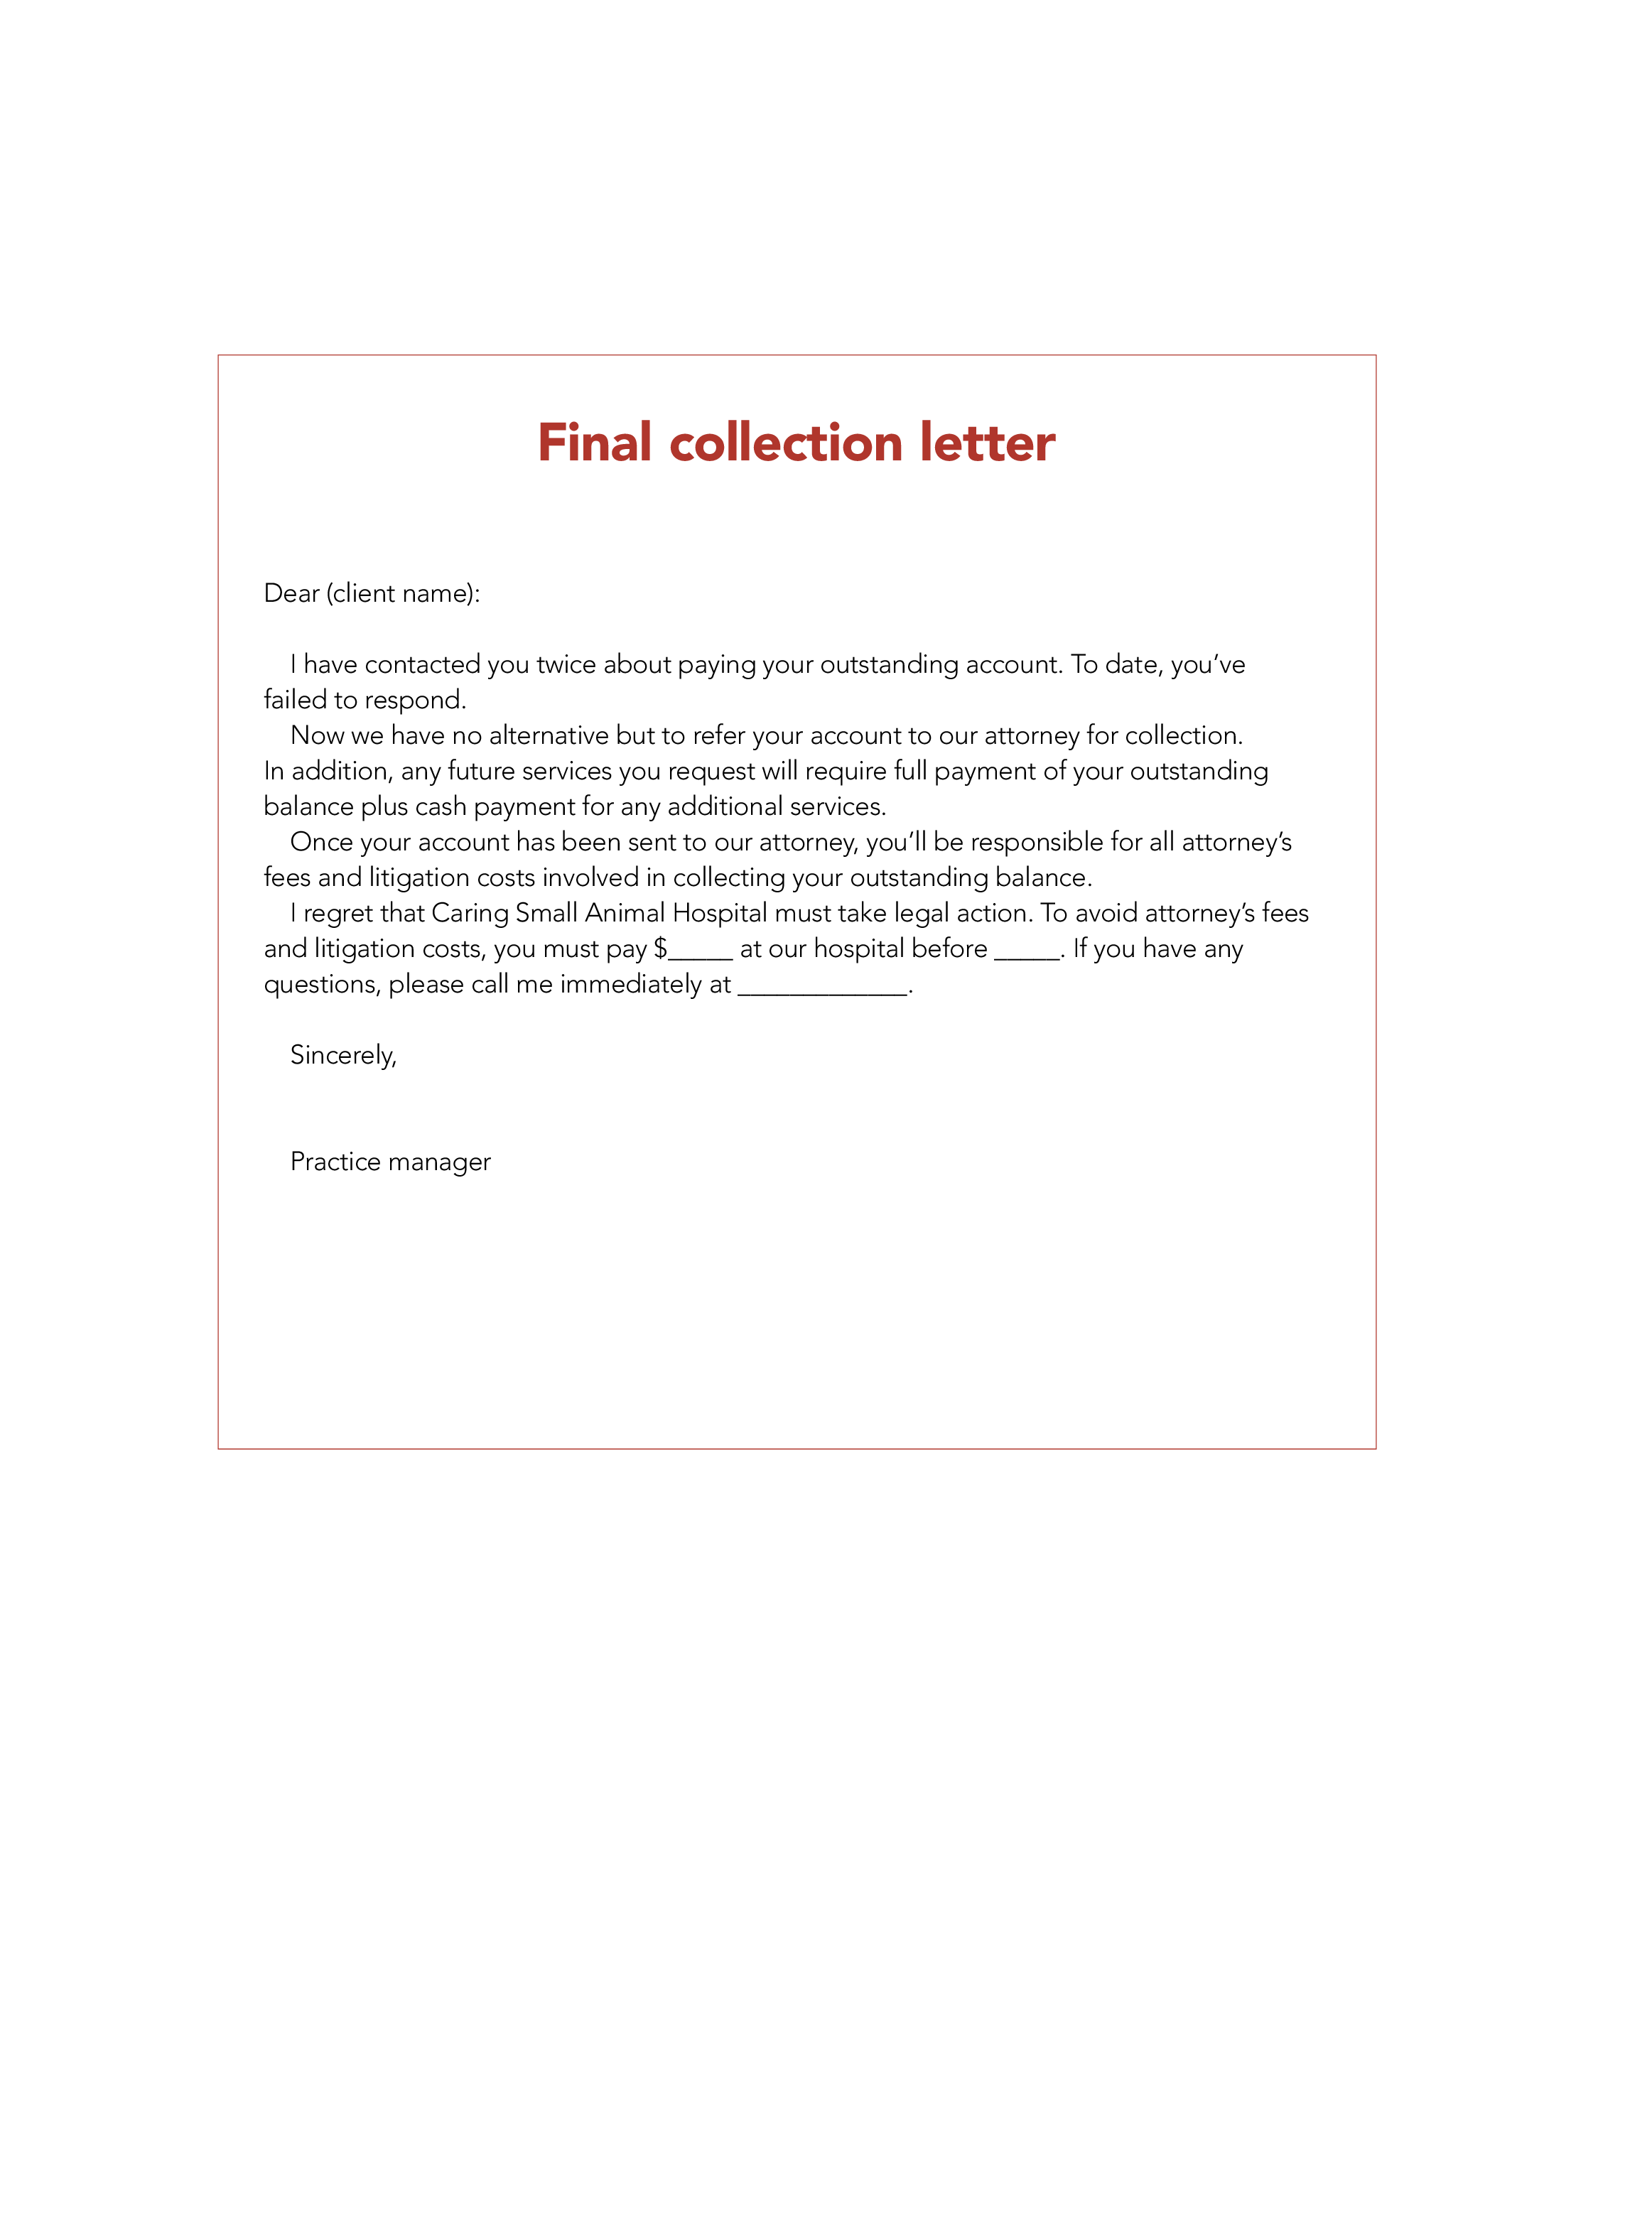 Final Collection Letter main image